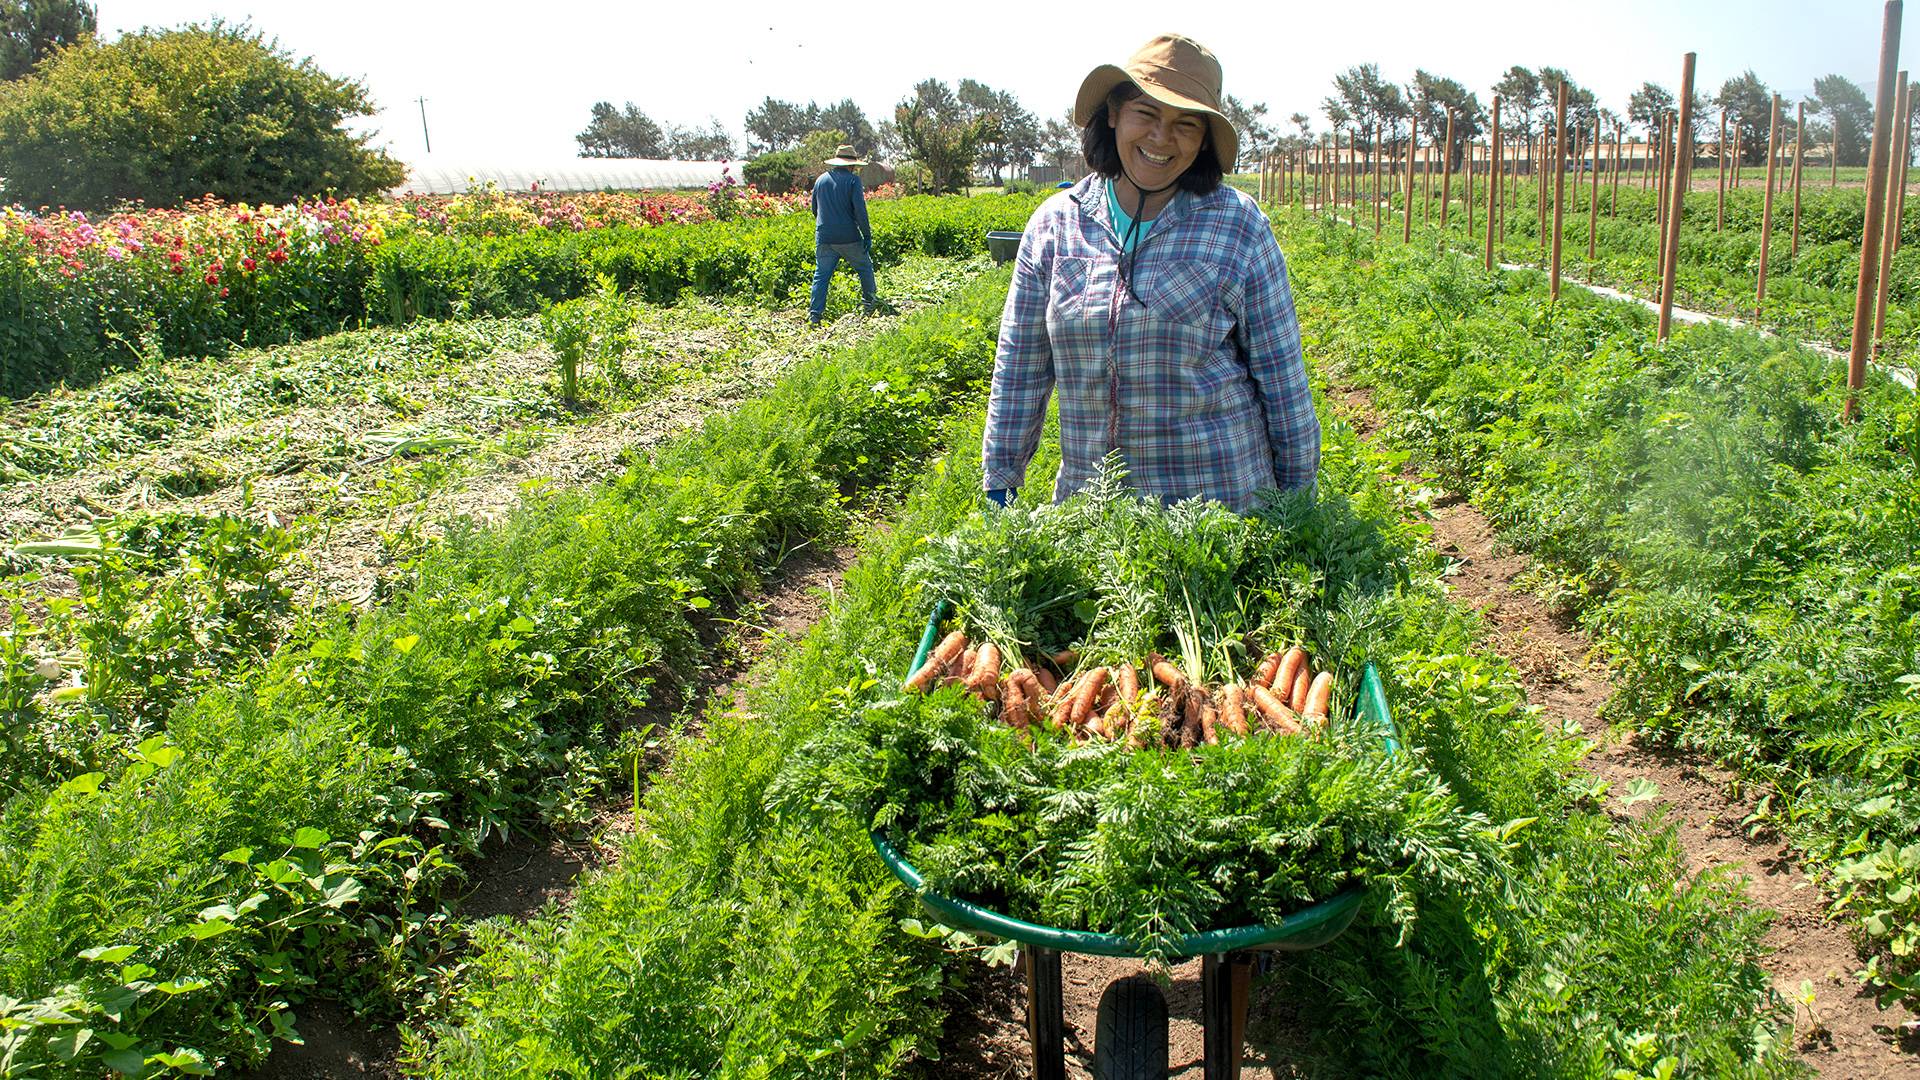 Smiling woman with hat in field with rows of carrots holding a wheelbarrow full of harvested carrots